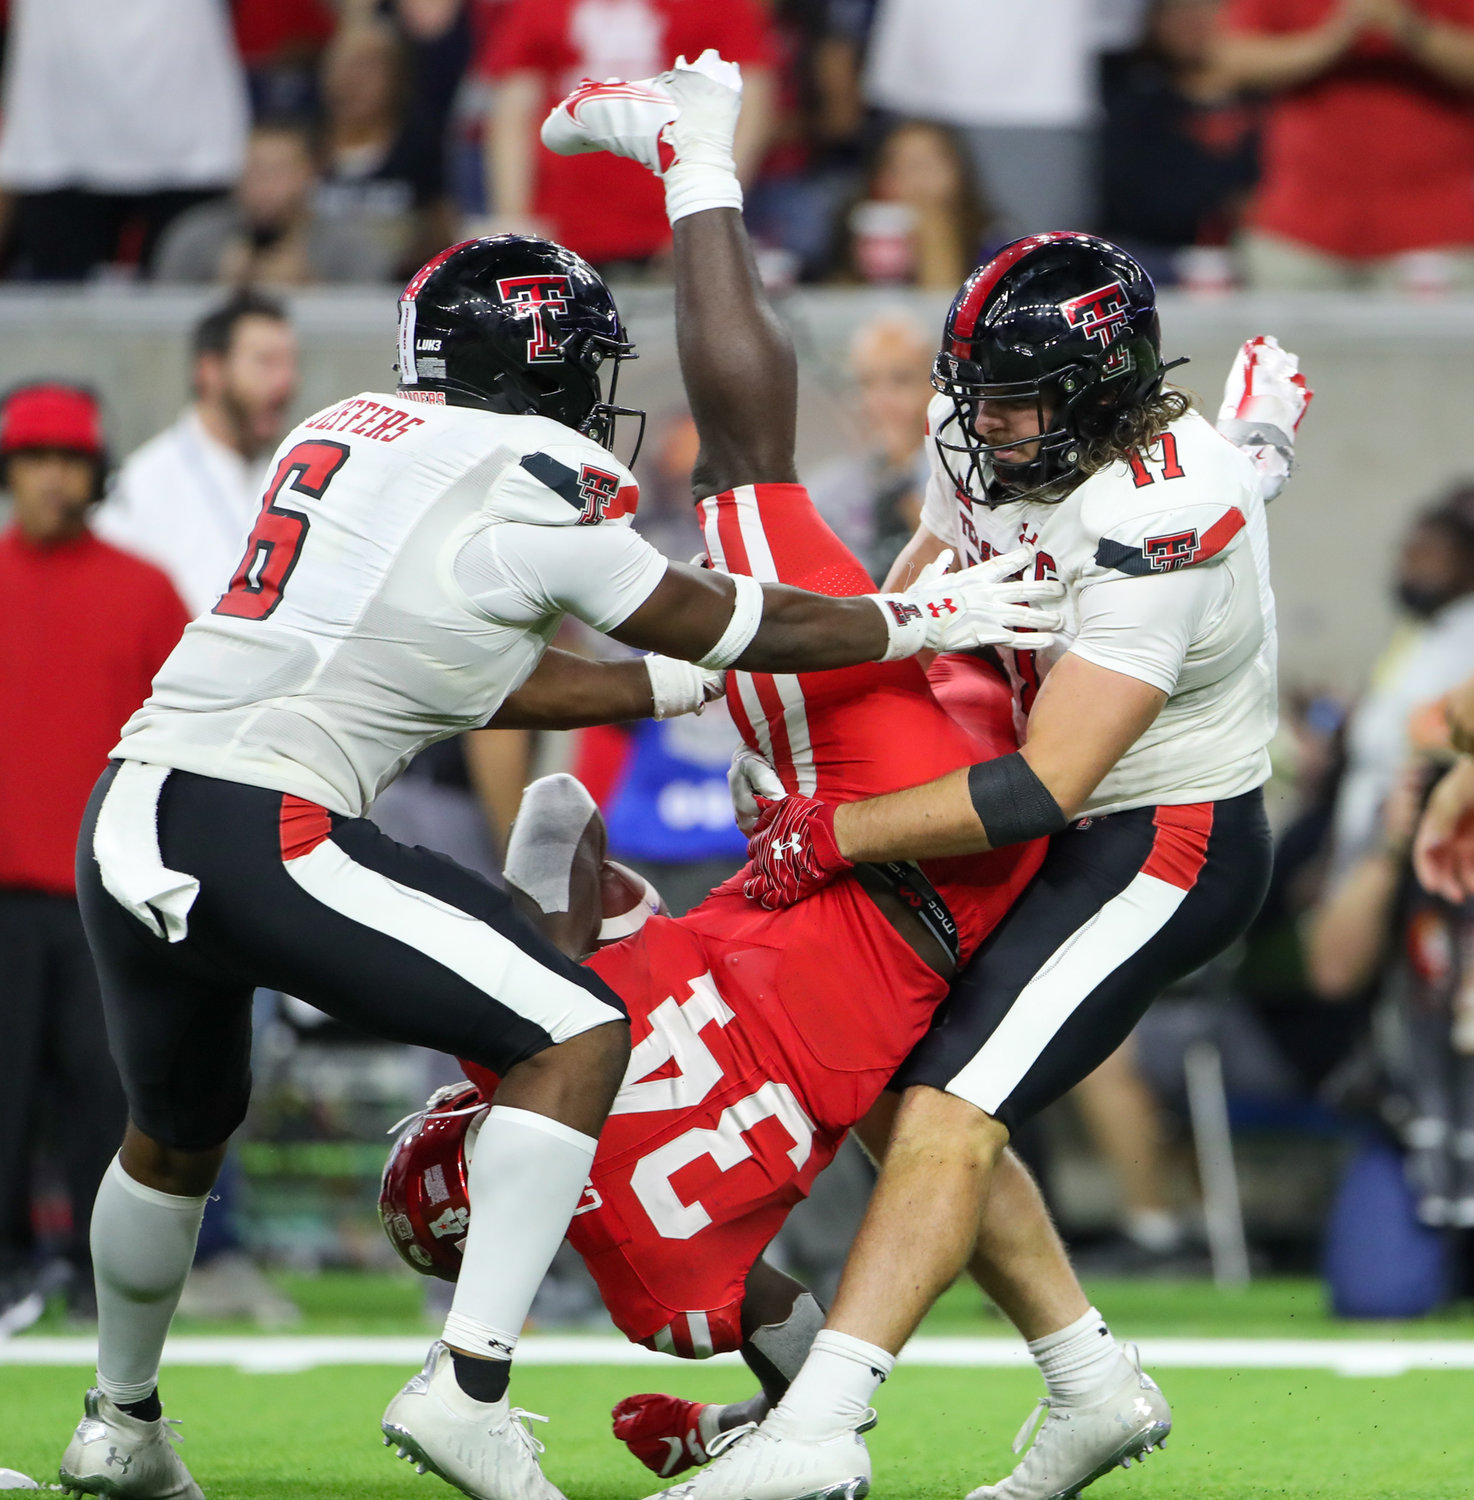 Houston Cougars running back Mulbah Car (34) is upended in the backfield by Texas Tech Red Raiders linebacker Colin Schooler (17) during an NCAA football game between Houston and Texas Tech on September 4, 2021 in Houston, Texas.